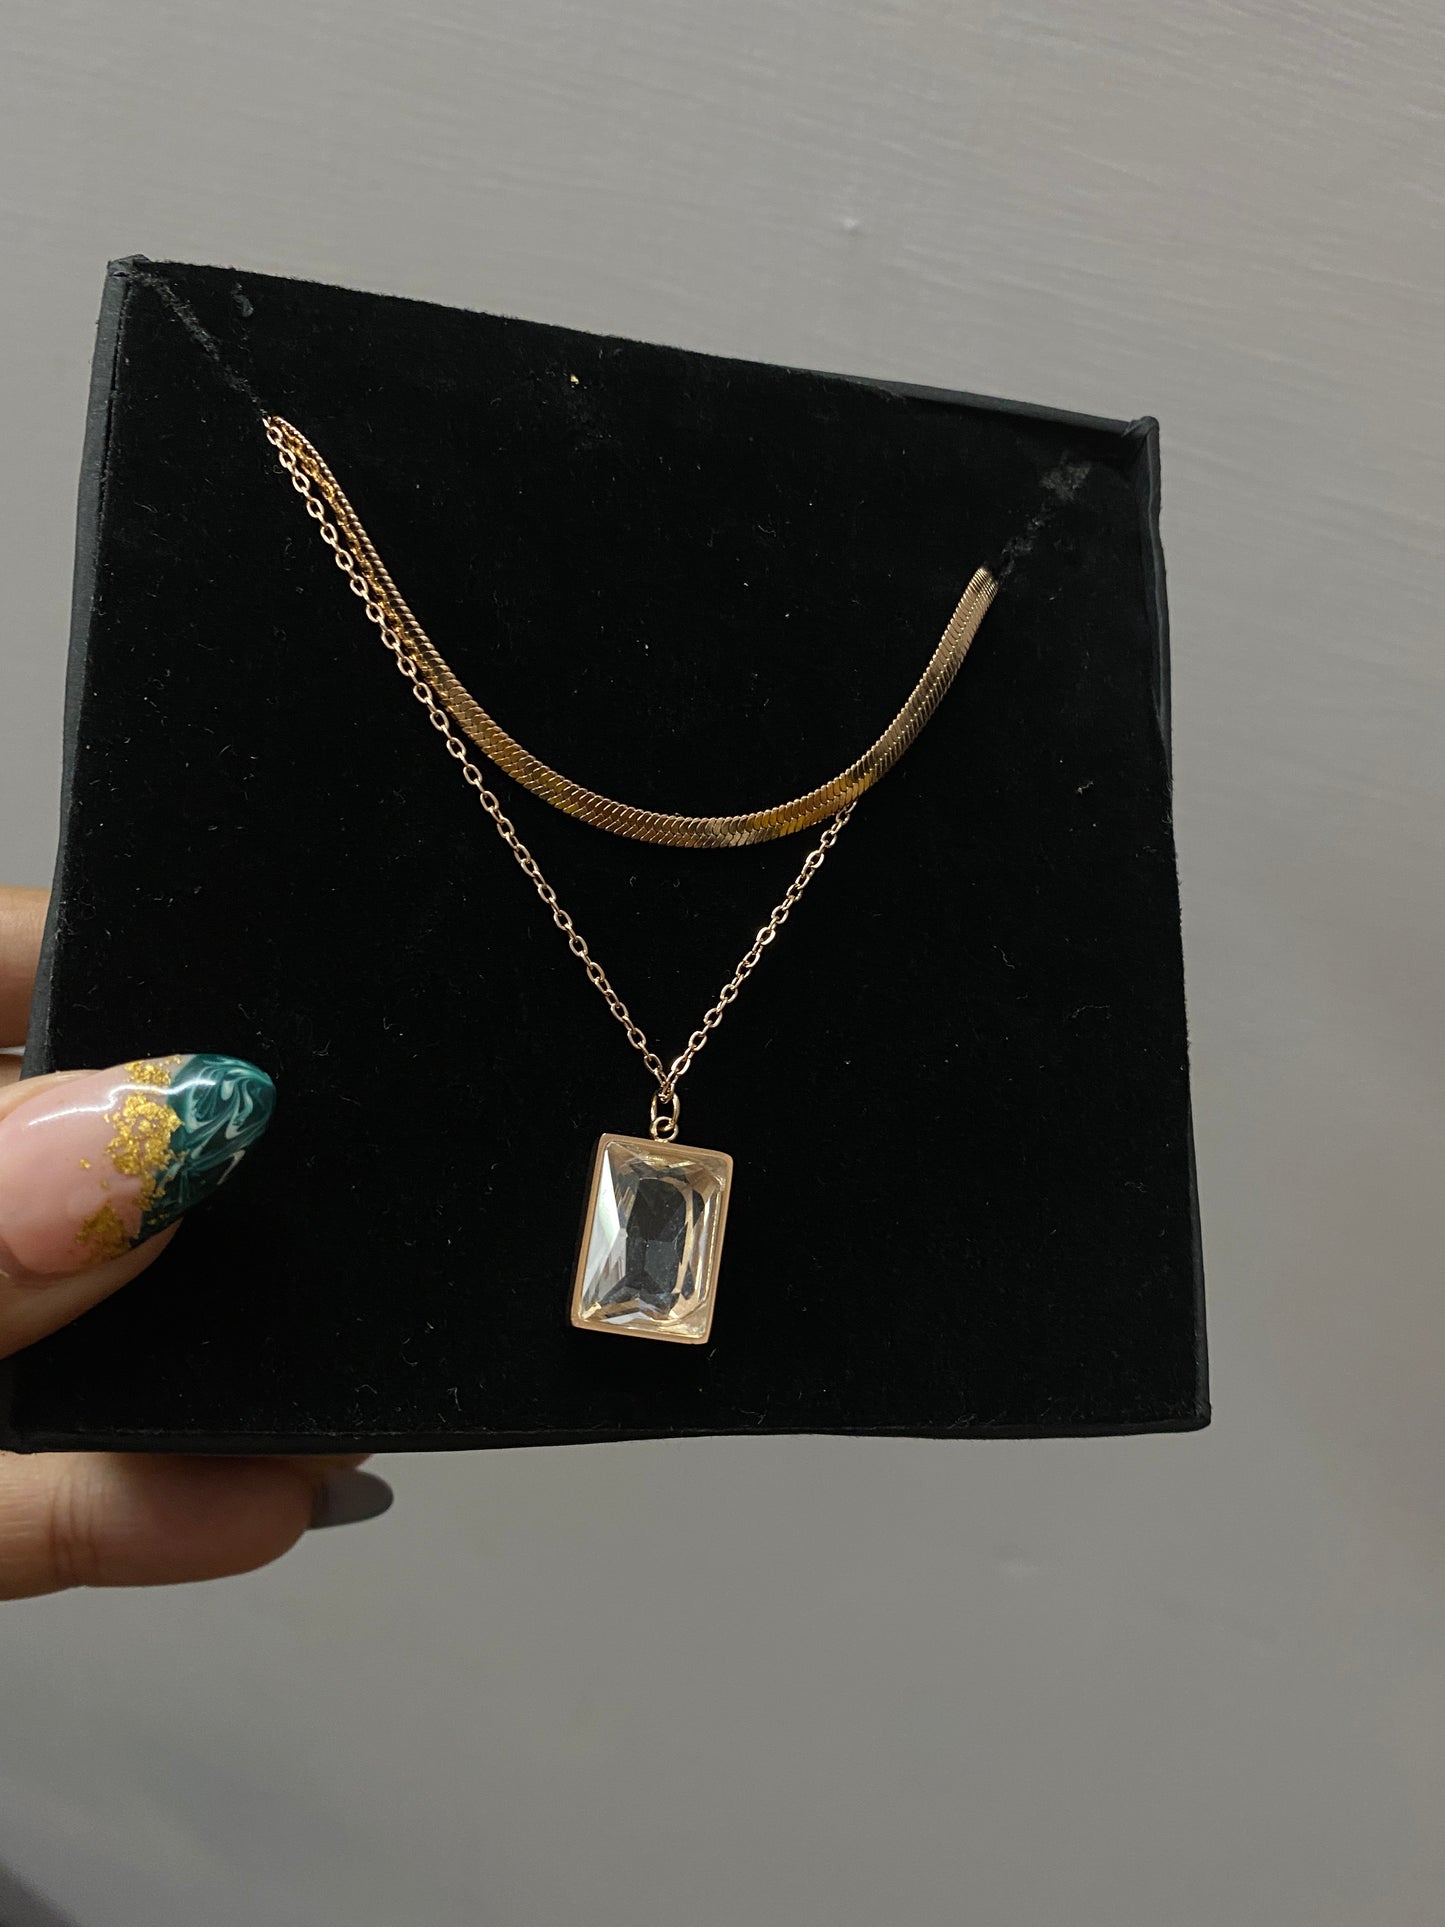 Lisa layered necklace